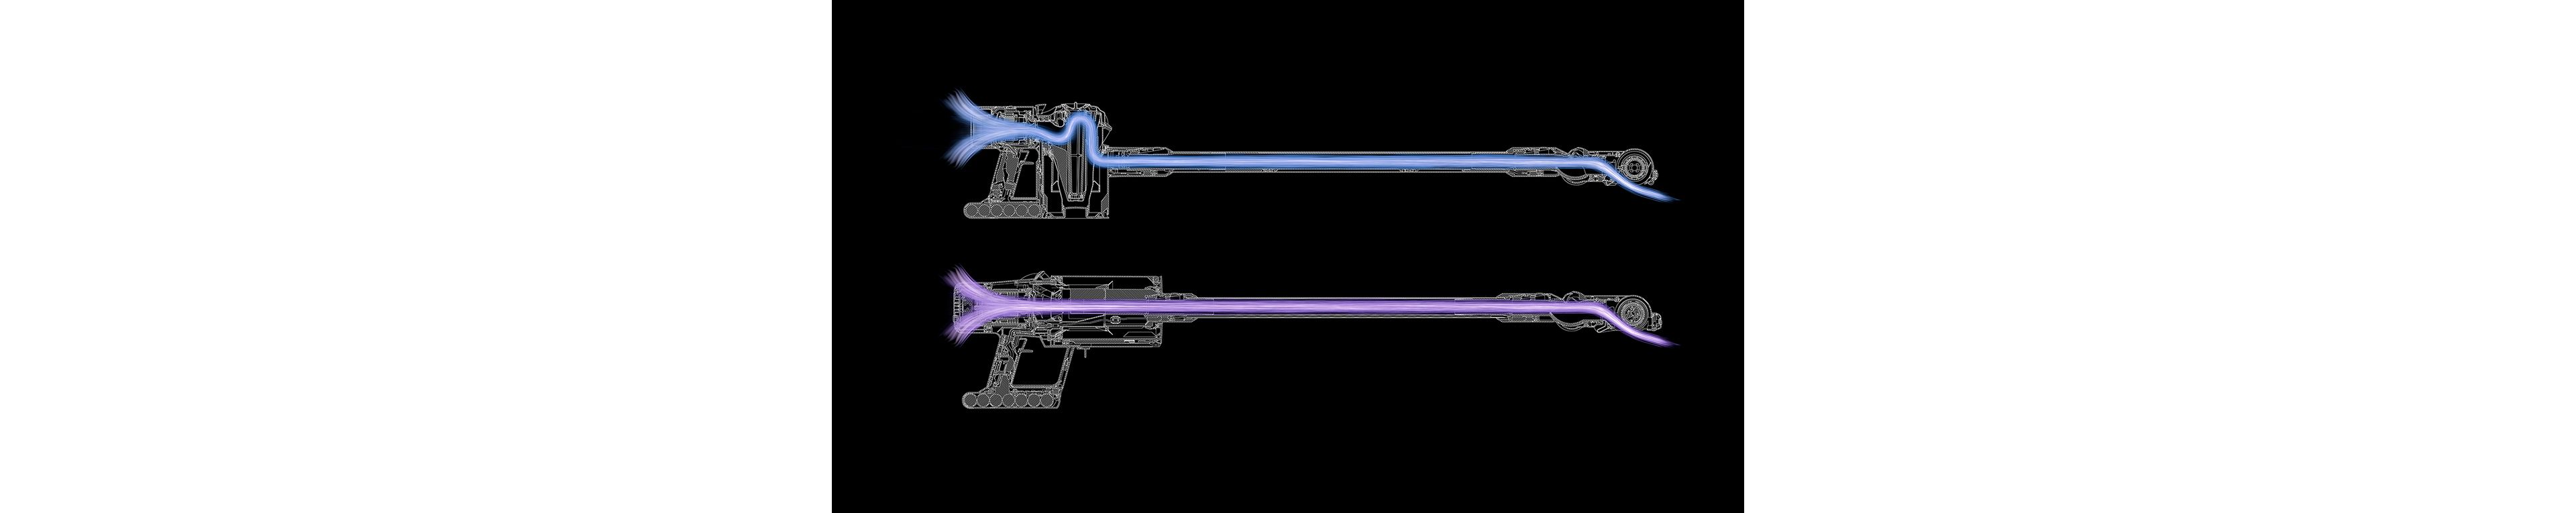 Dyson V11 side by side with a Dyson V8 to illustrate the in-line configuration